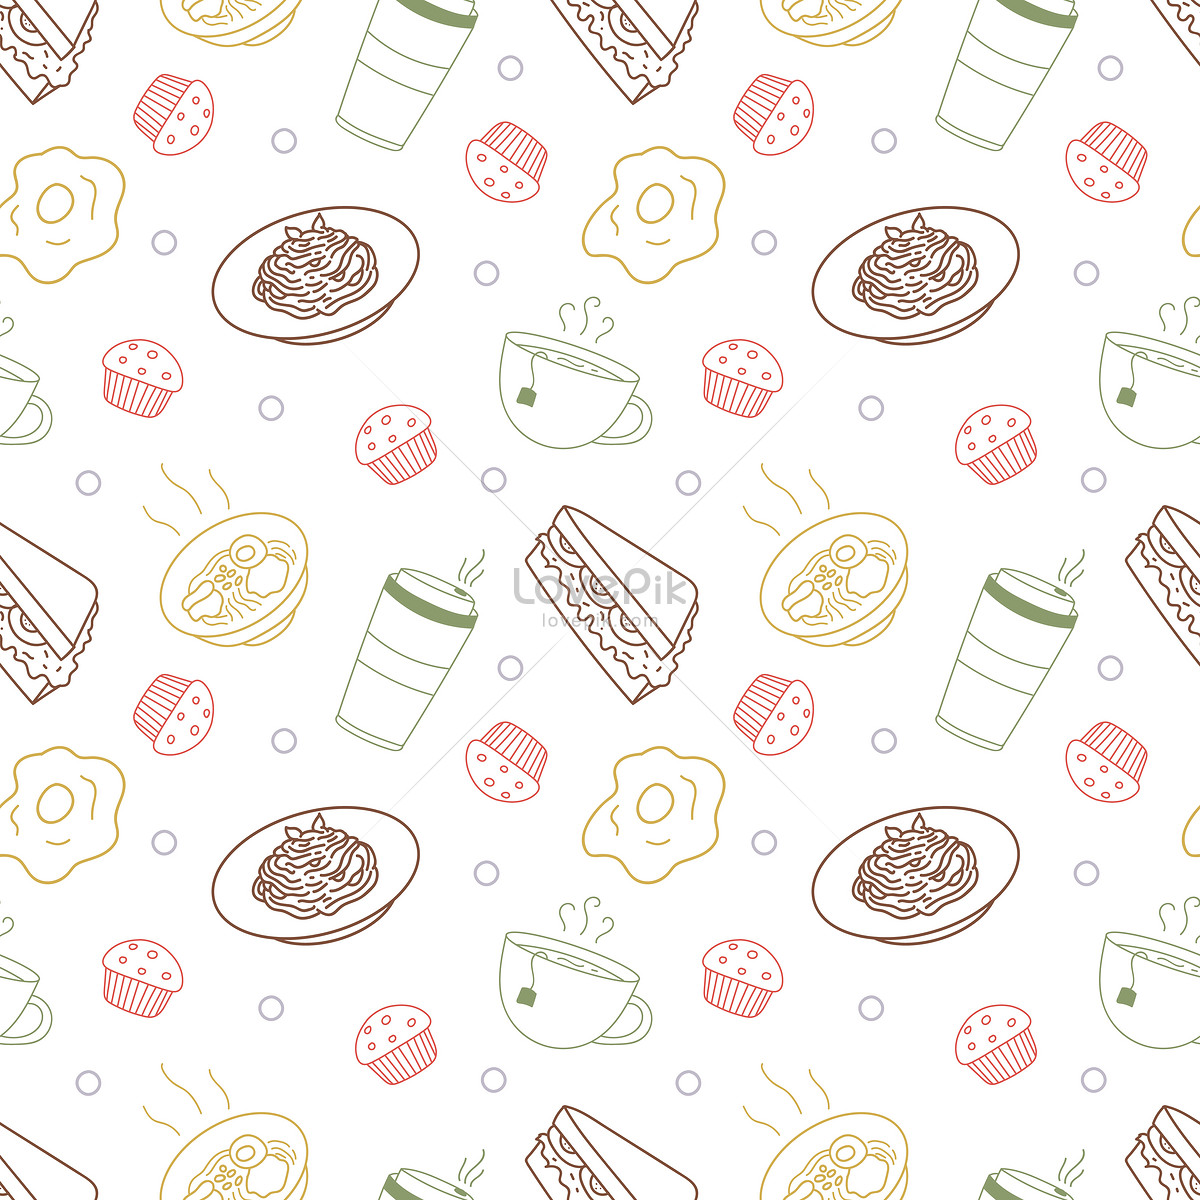 Delicious Colorful Food Texture Background Download Free | Banner Background  Image on Lovepik | 450042229